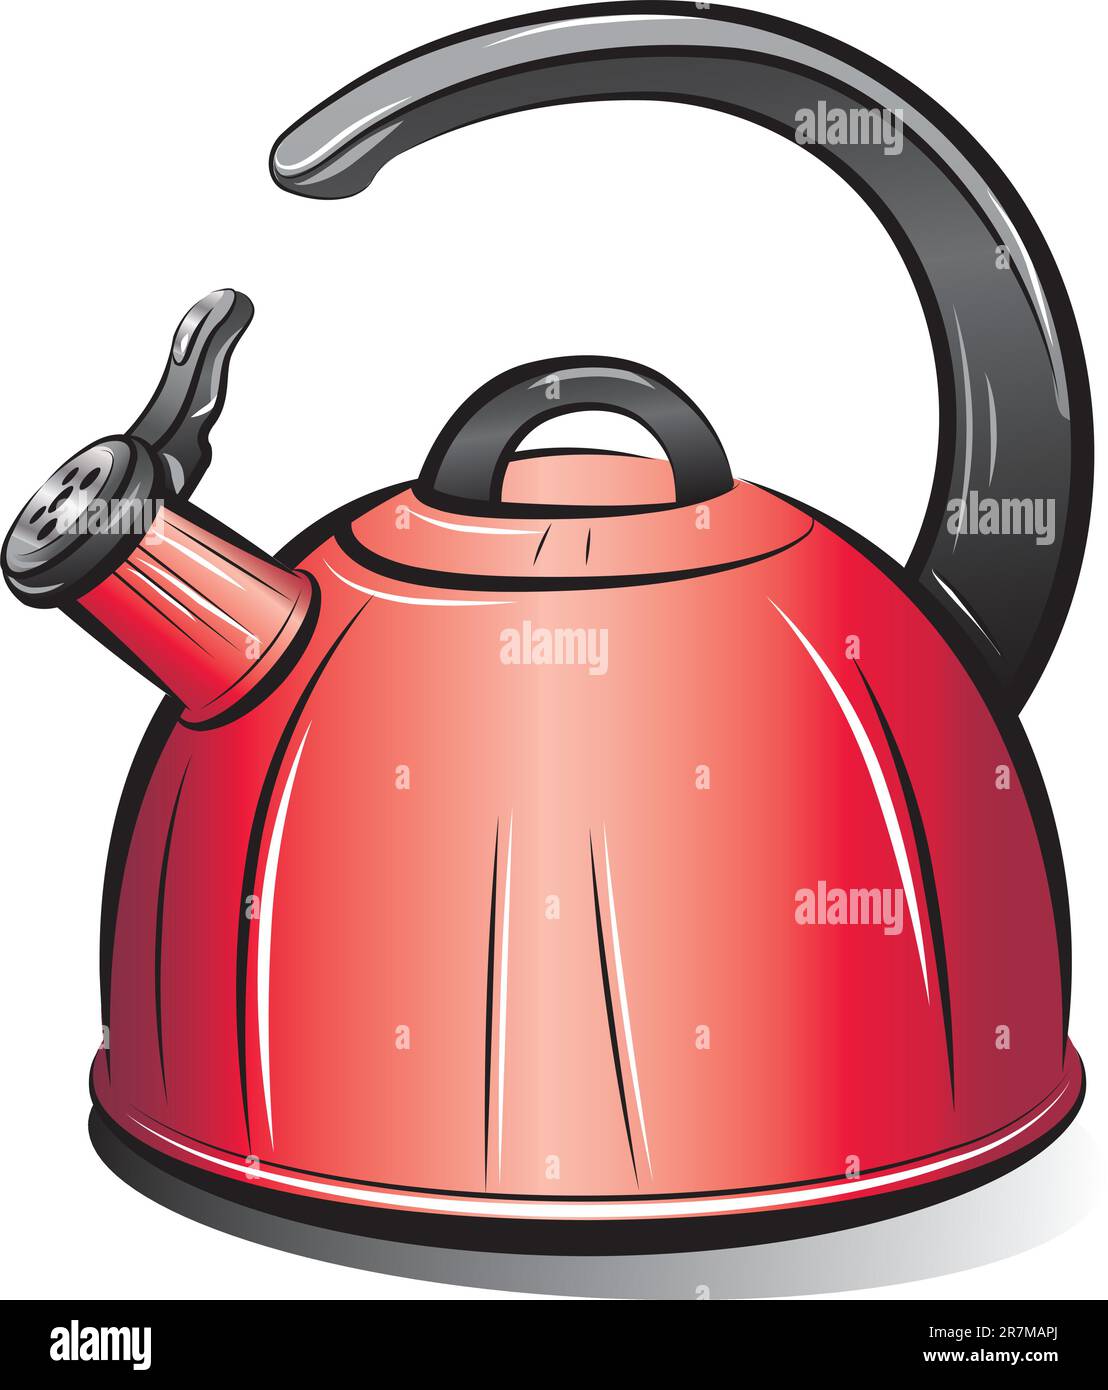 https://c8.alamy.com/comp/2R7MAPJ/drawing-of-the-red-teapot-kettle-on-white-background-vector-illustration-2R7MAPJ.jpg